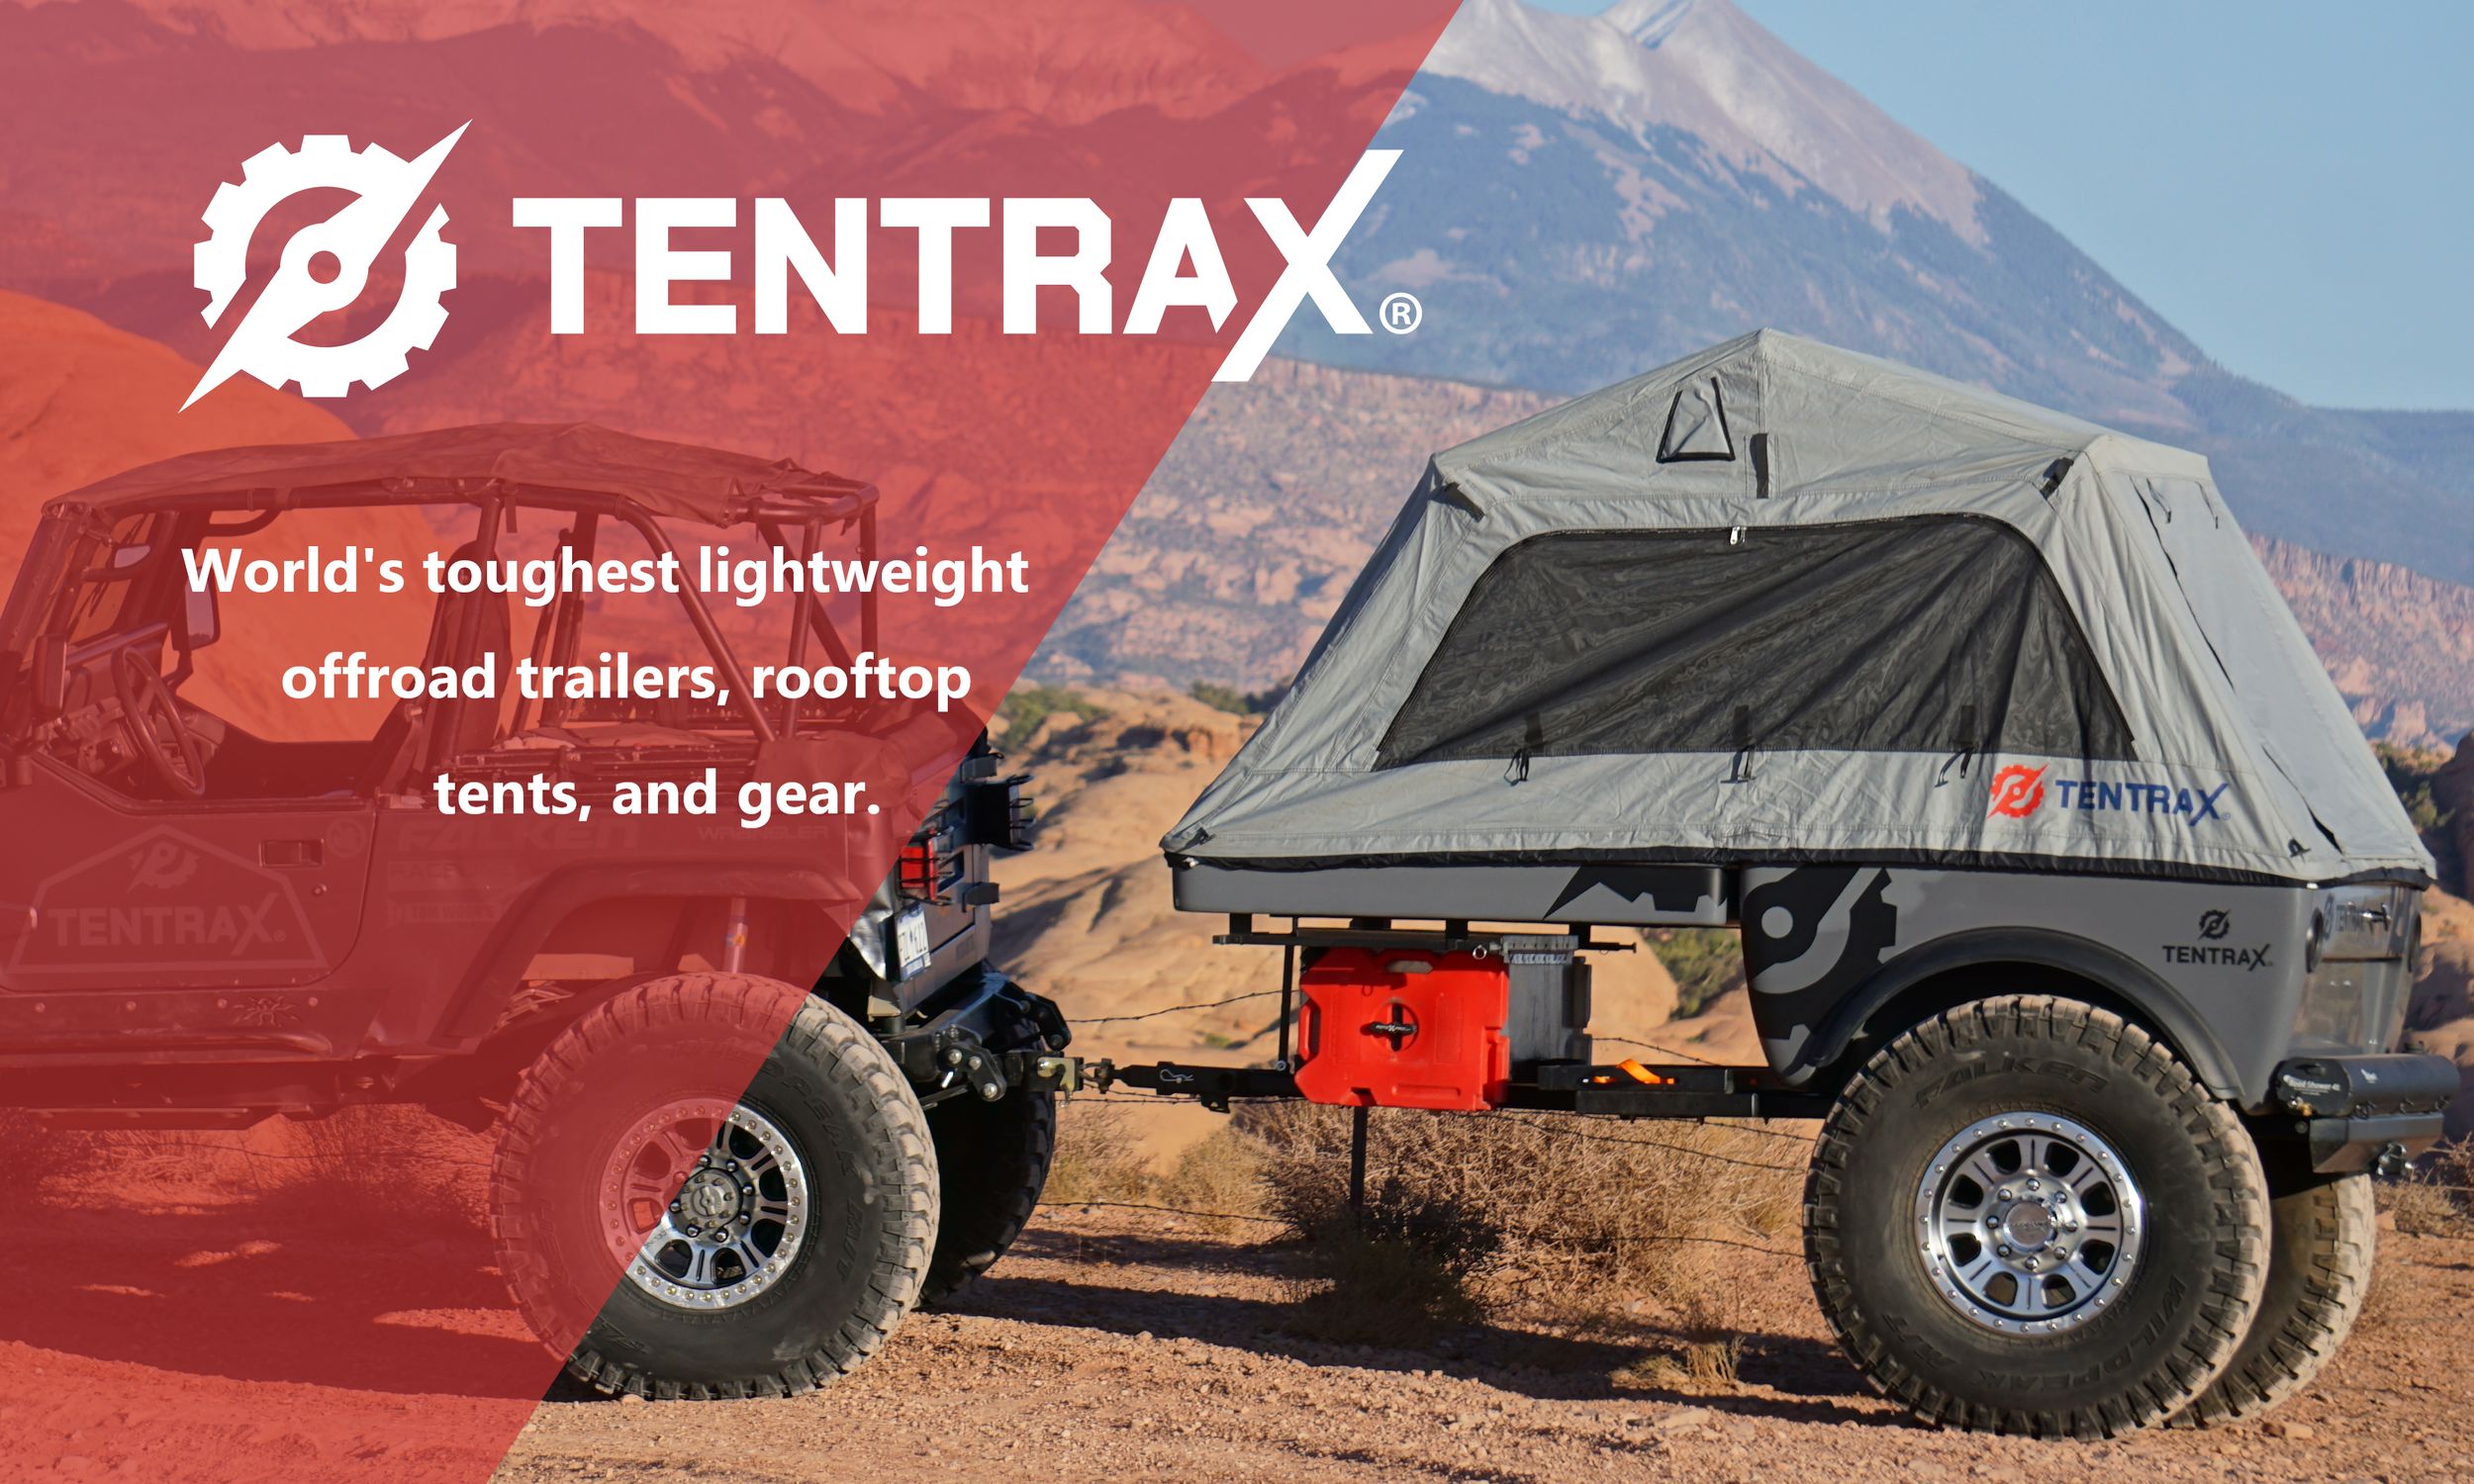 OVERLAND OFF-ROAD TRAILER — TENTRAX :: EXPLORE SIMPLY :: Lightweight & well-designed overland camping trailers for the adventure lifestyle! Overland adventure trailers | Hiker Trailers | Off-Road Camping Trailer | Off